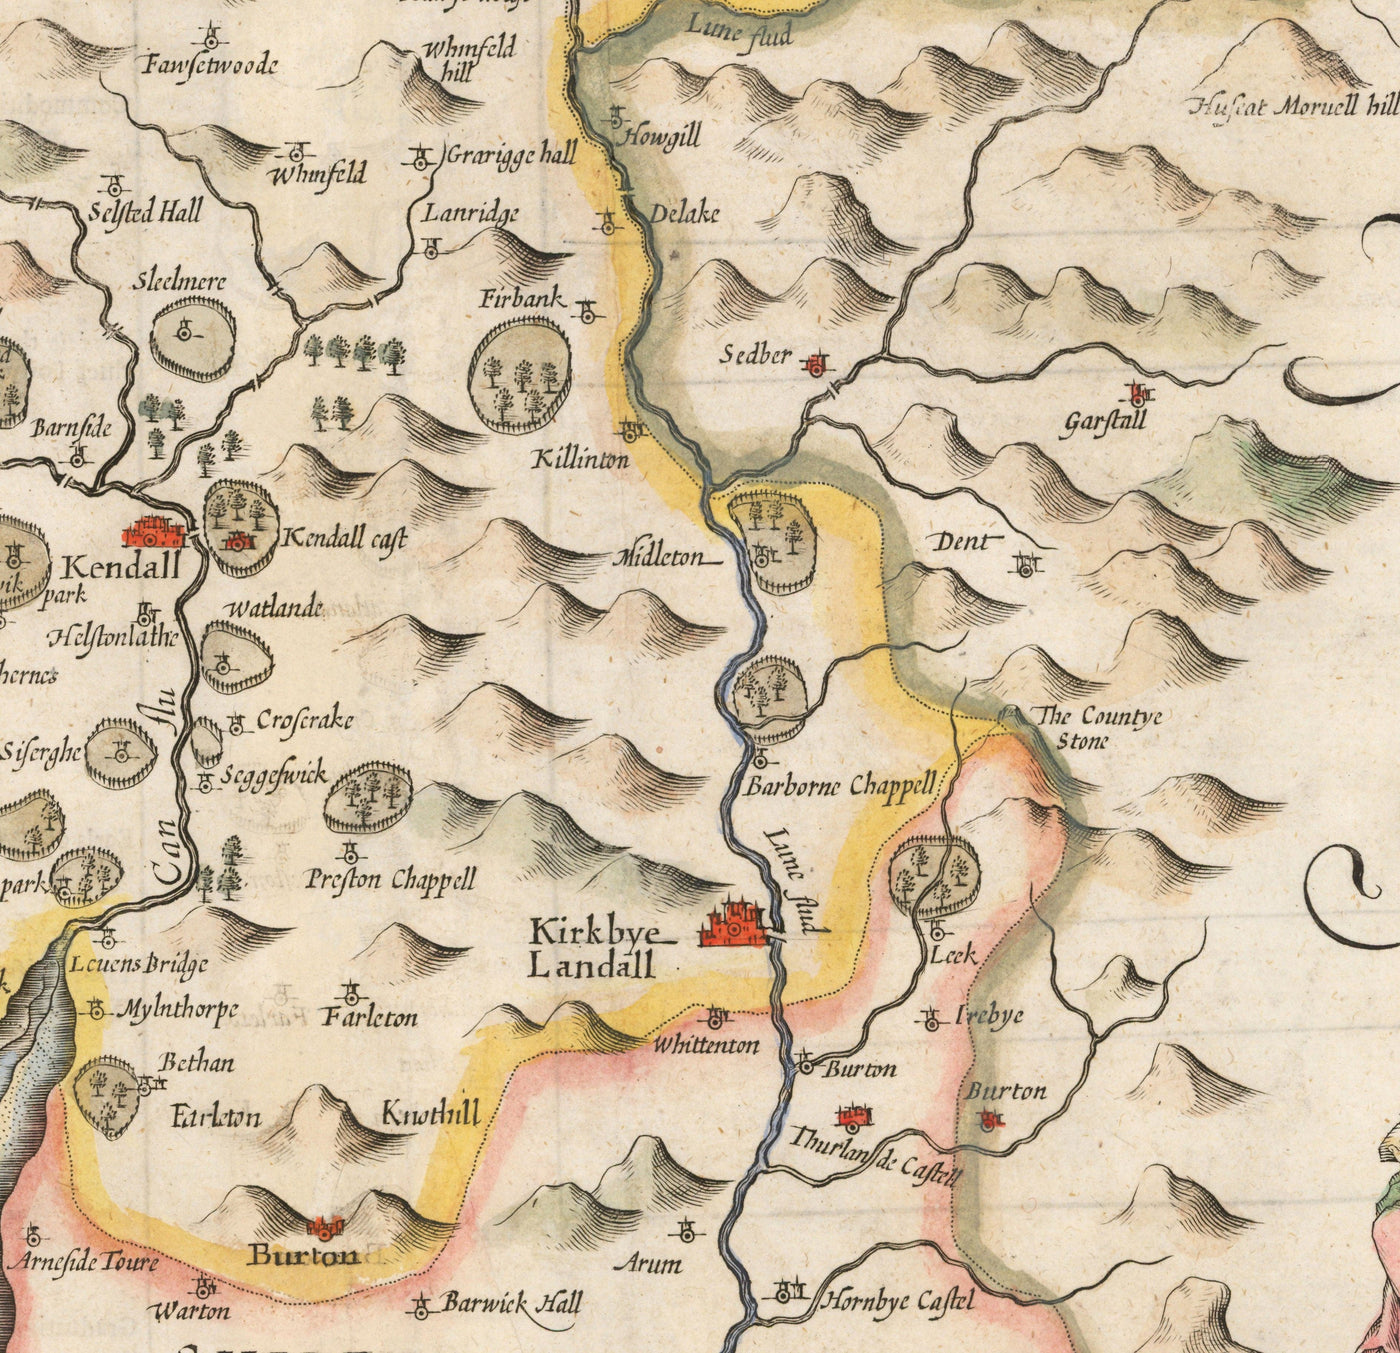 Old Map of Westmorland, 1611 by John Speed - Lake District, Cumbria, Kendal, Windermere, Grasmere